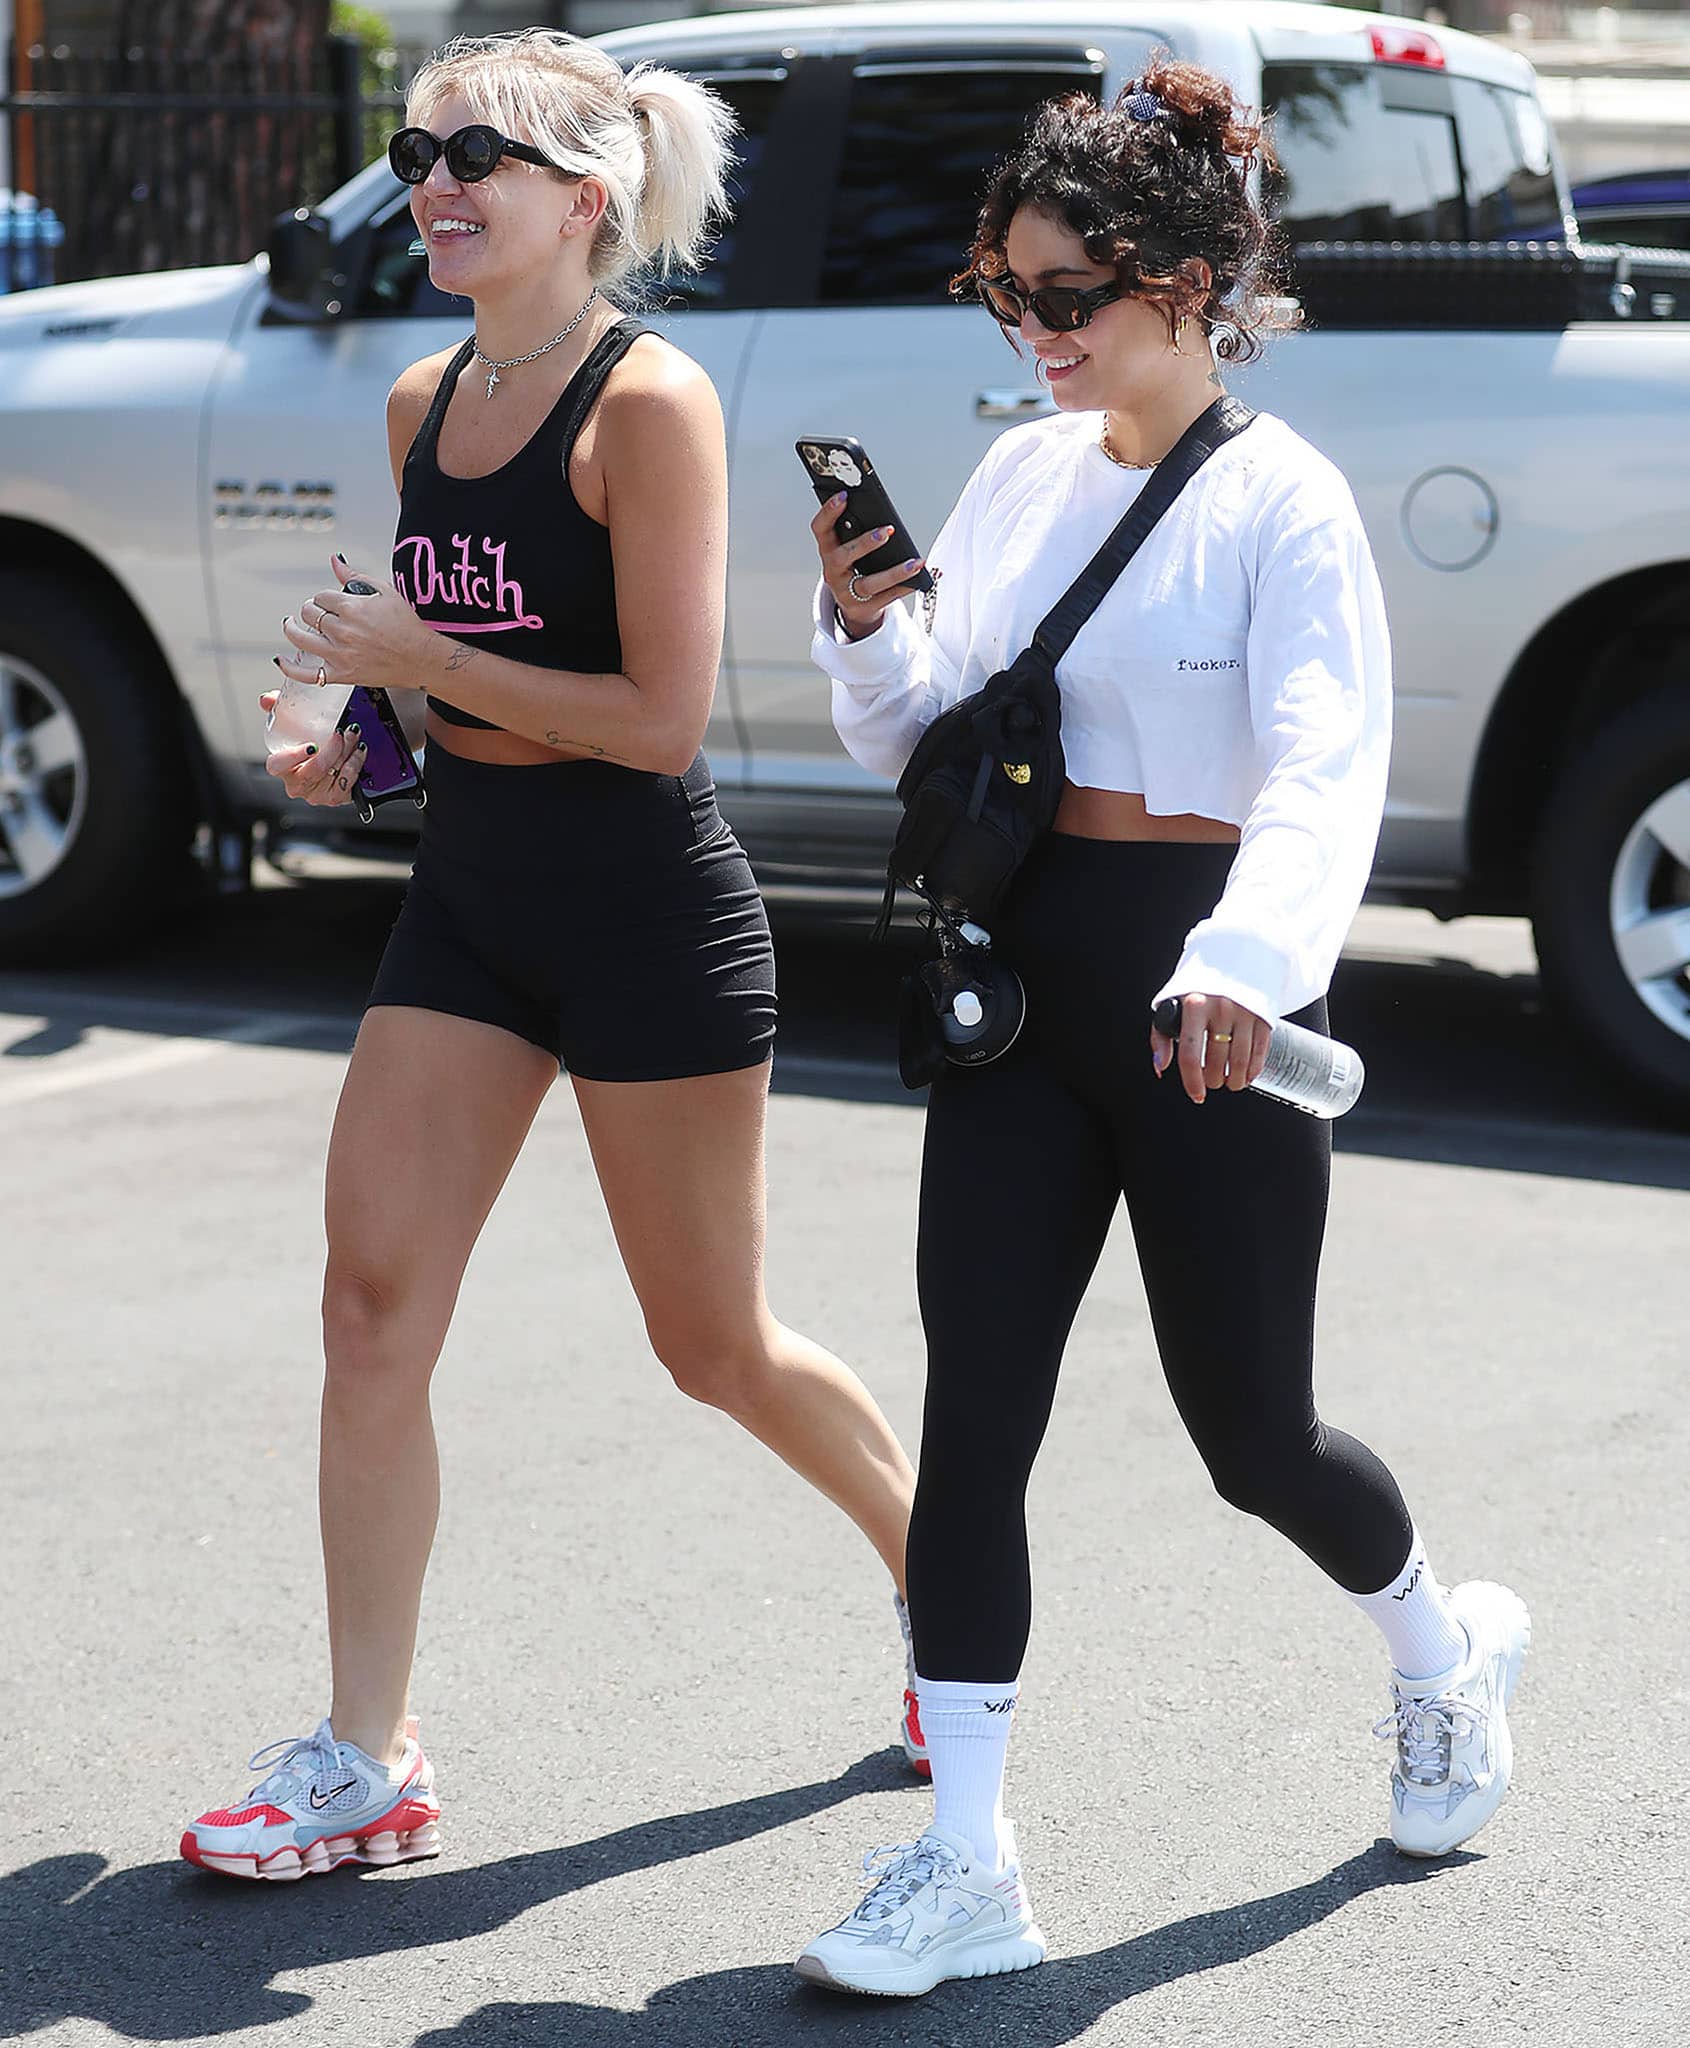 Vanessa Hudgens and GG Magree step out for a stroll in Studio City on June 28, 2021